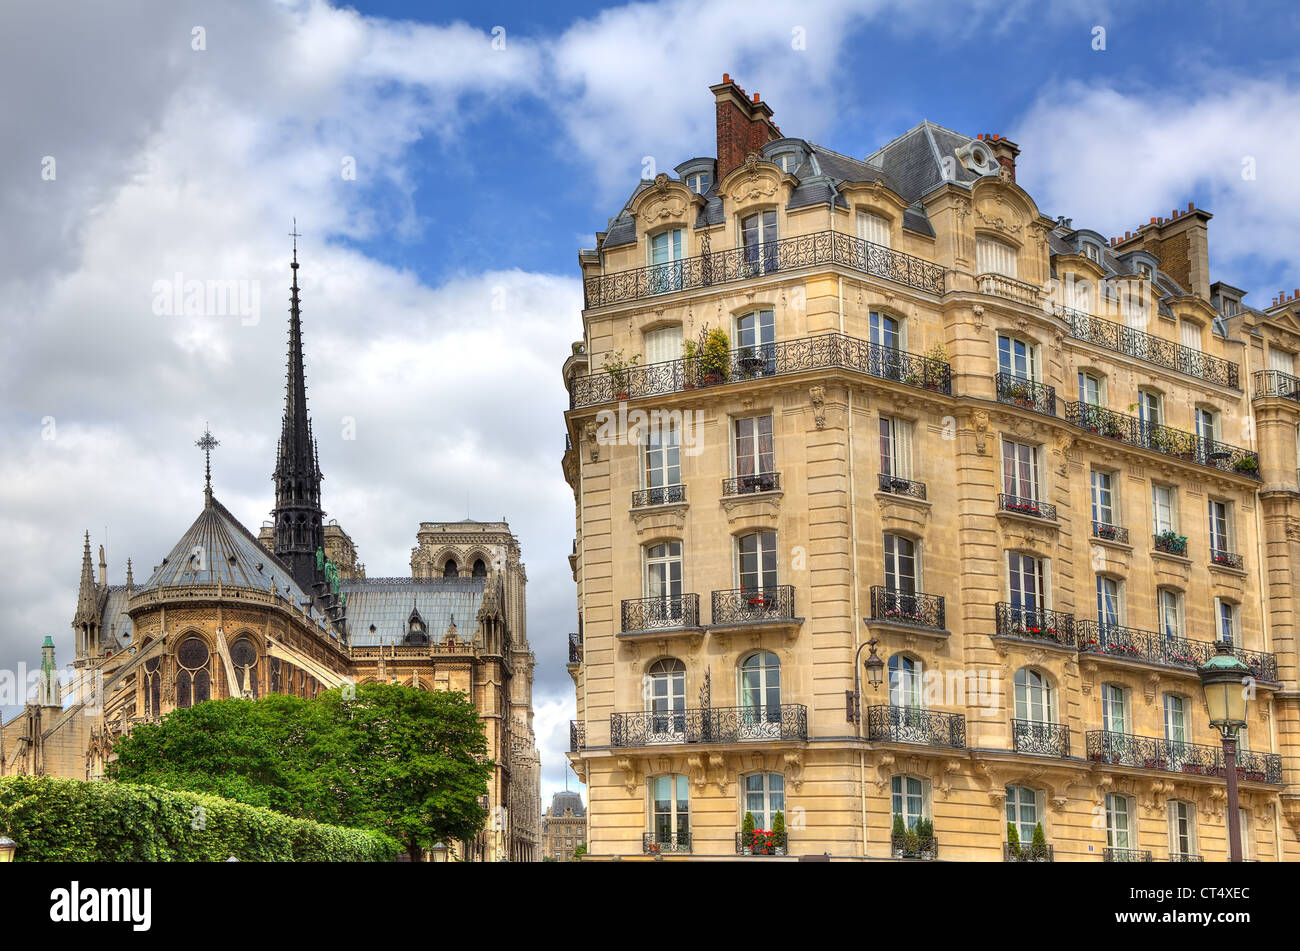 Traditional parisian building and Notre Dame cathedral on background in Paris, France. Stock Photo